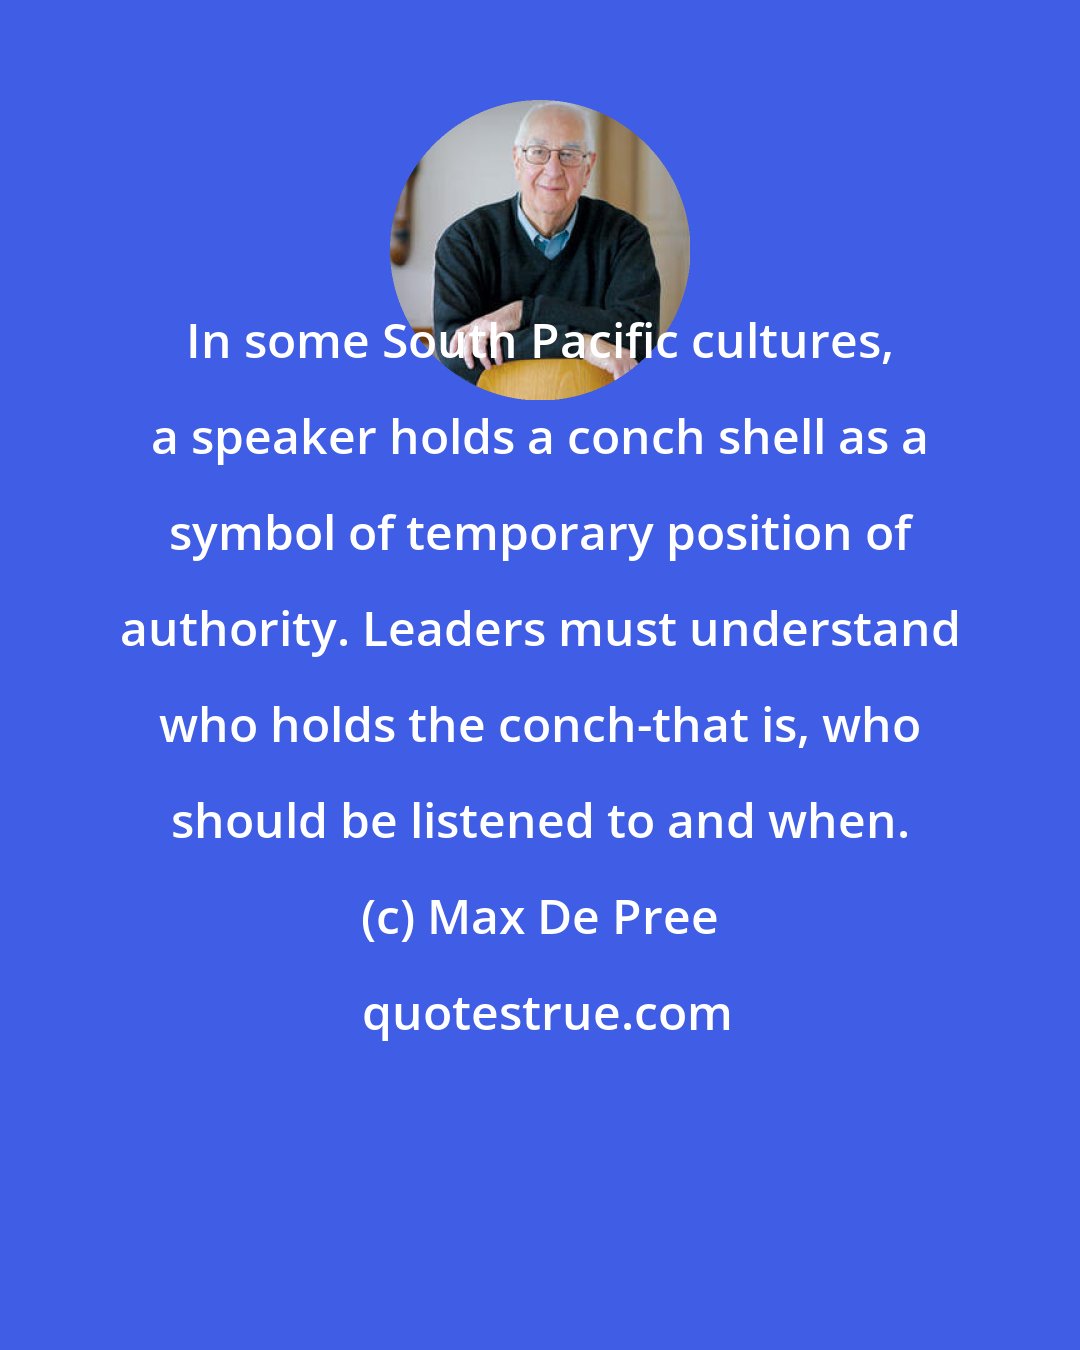 Max De Pree: In some South Pacific cultures, a speaker holds a conch shell as a symbol of temporary position of authority. Leaders must understand who holds the conch-that is, who should be listened to and when.